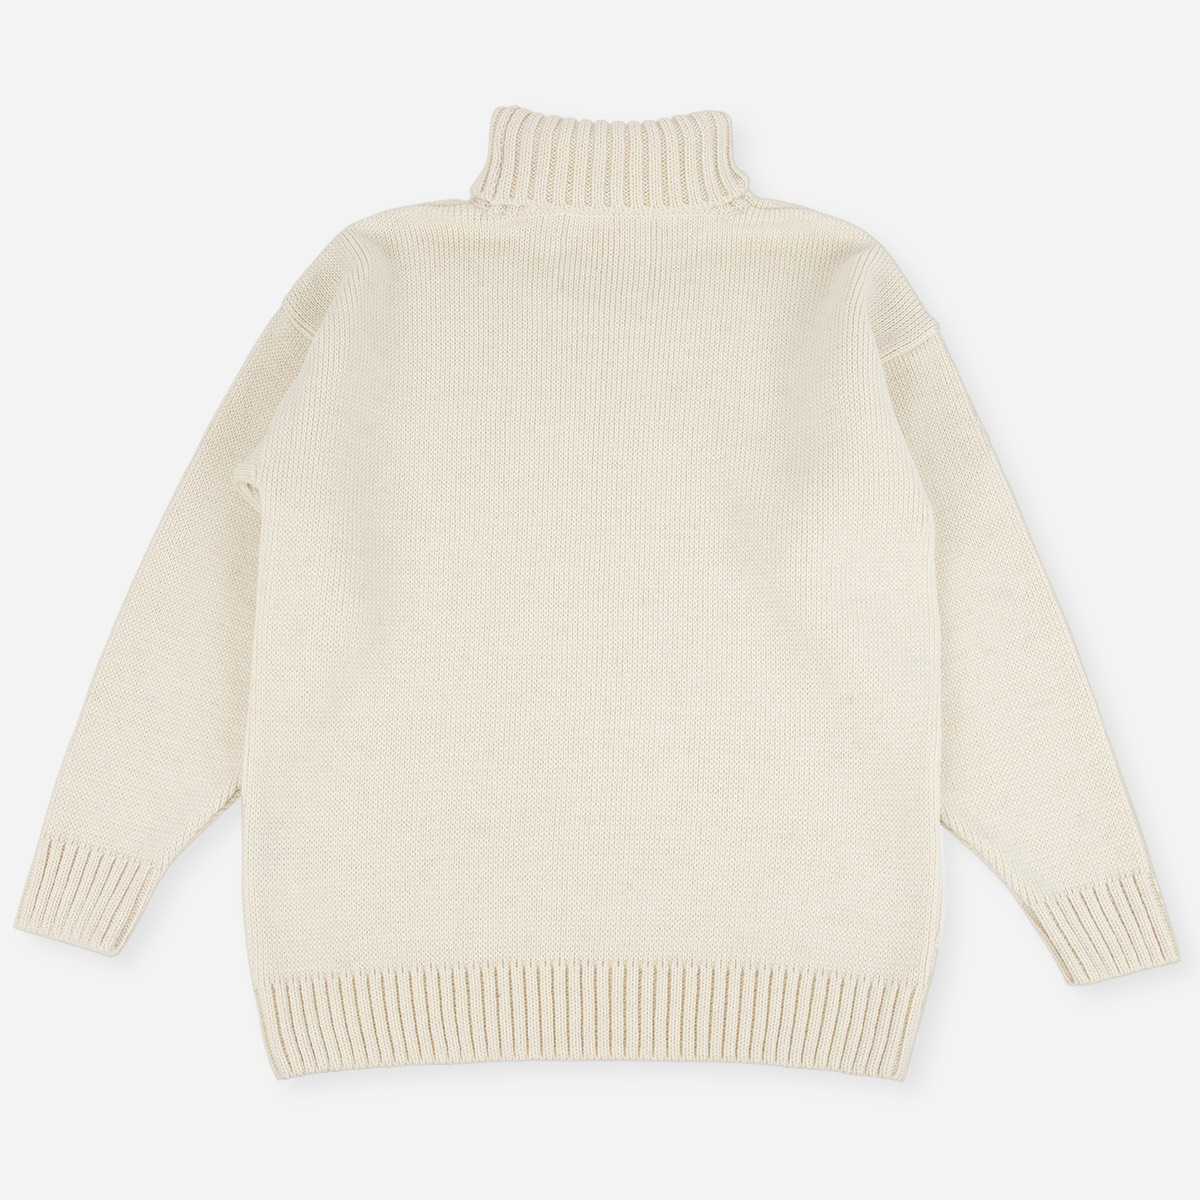 Merino Wool Heavy-Weight Submariner Roll Neck Sweater by Malle London